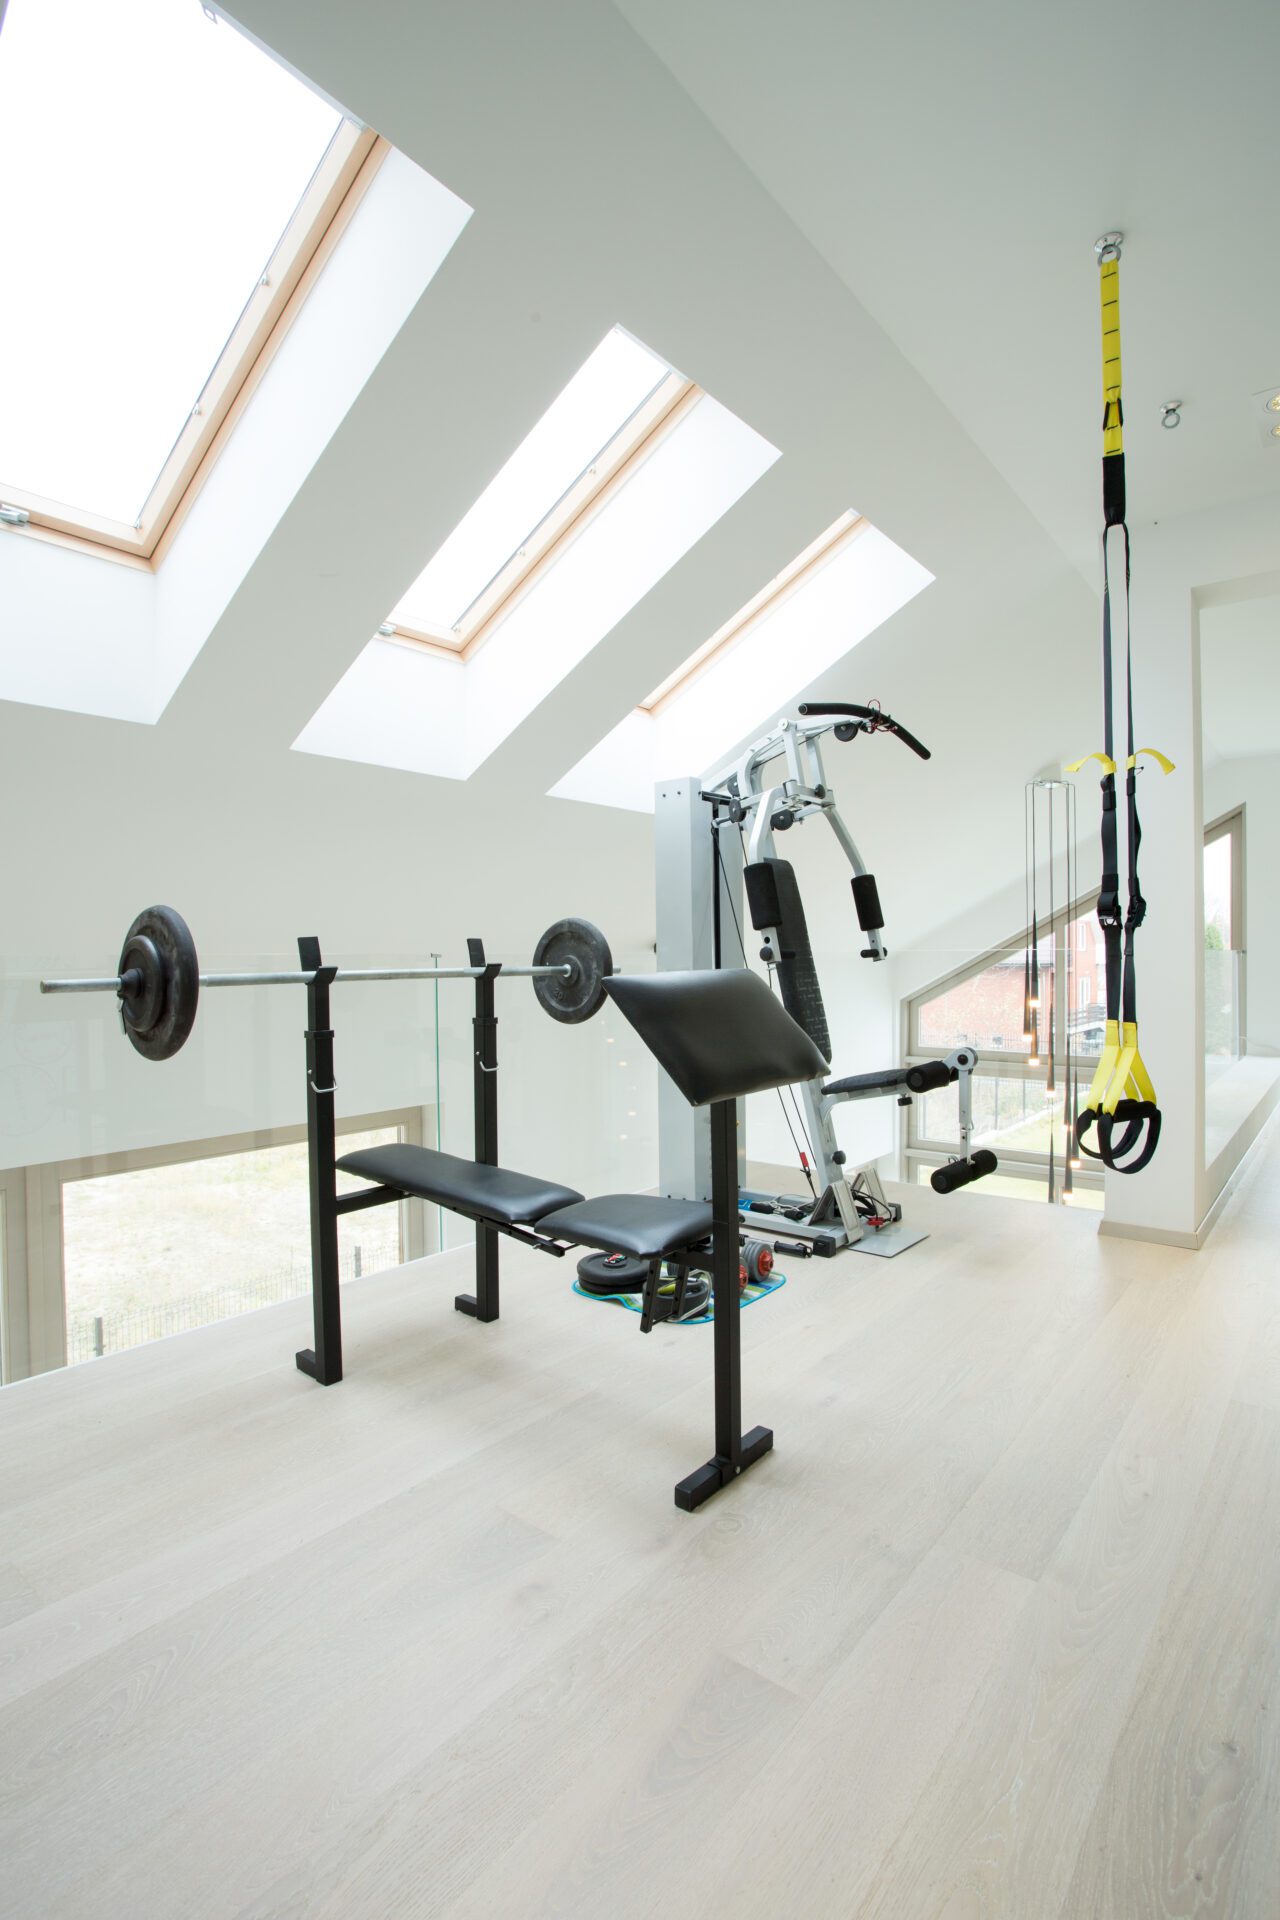 All-in-one Gym Equipment